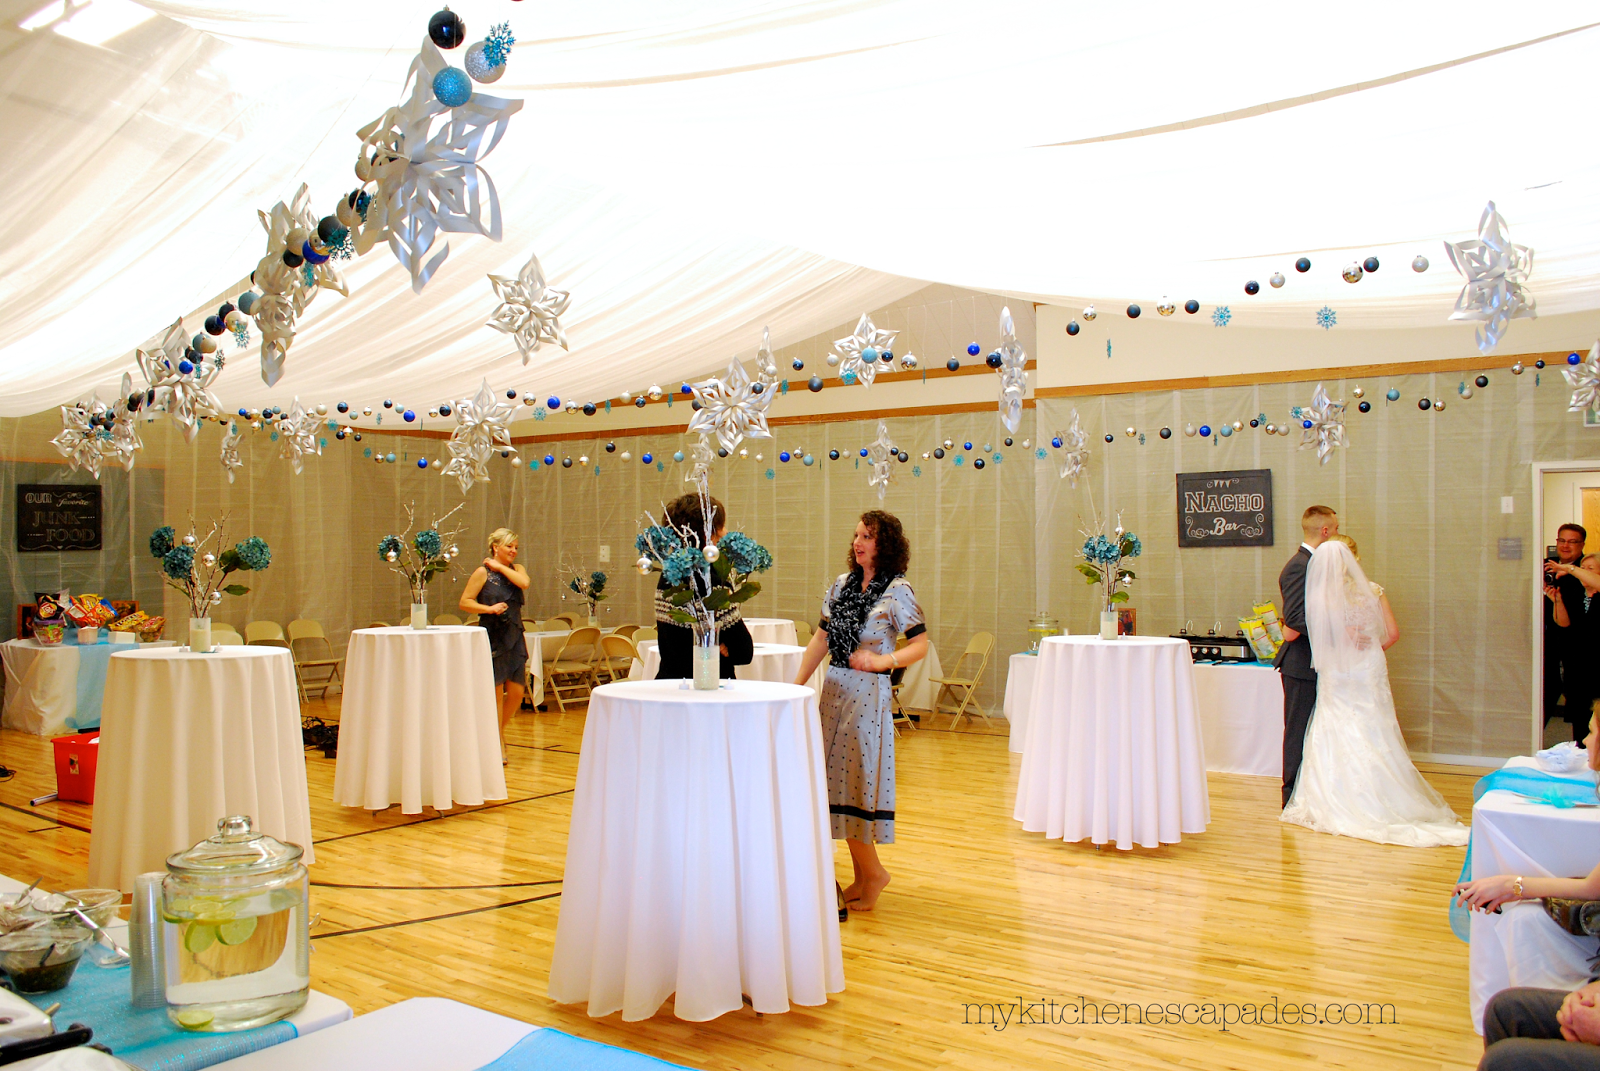 Wedding Ceiling Draping Tutorial How To Measure And Hang A